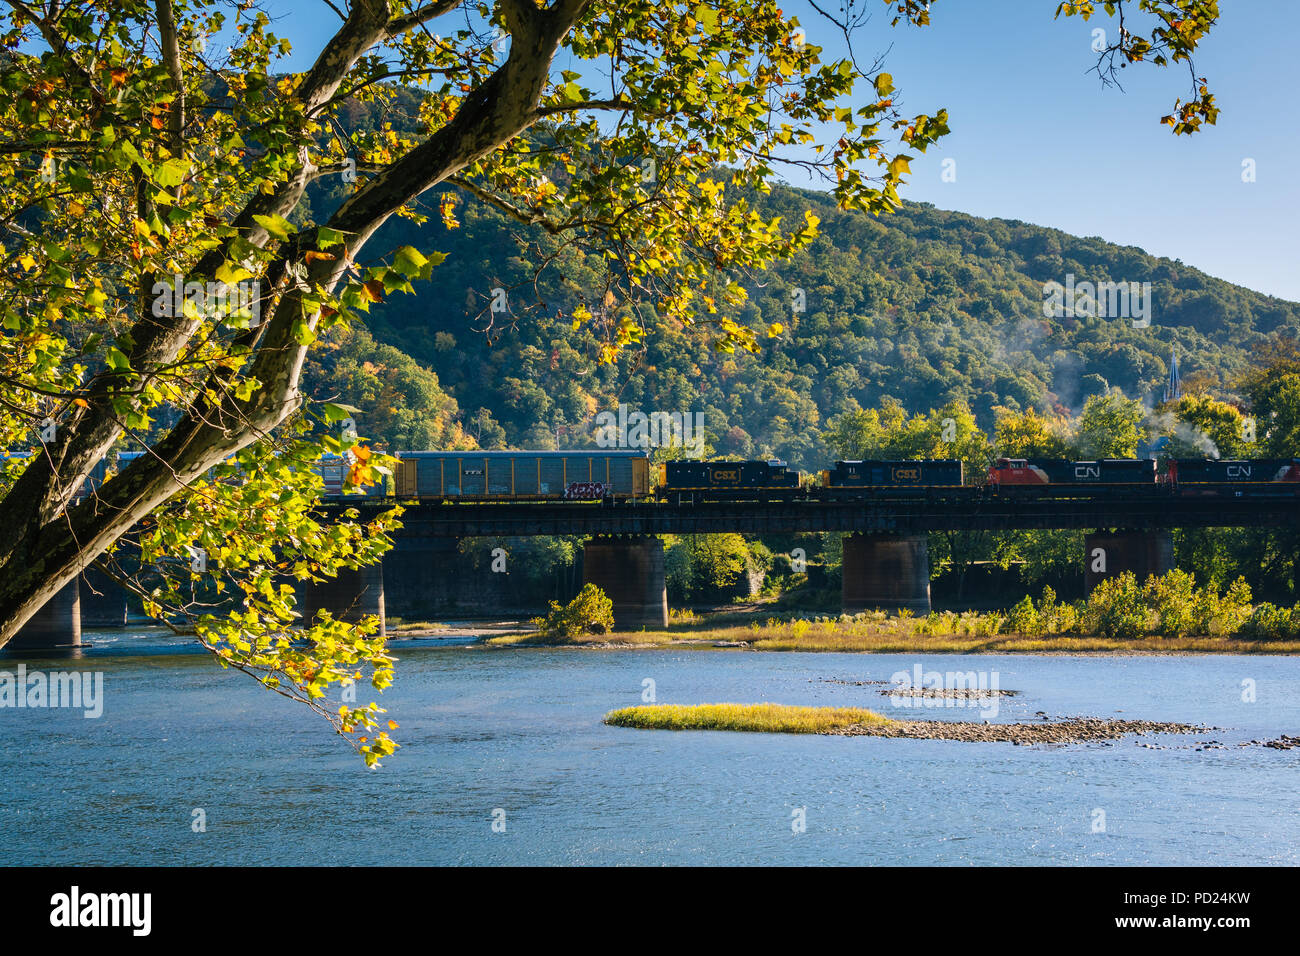 A train crossing the Potomac River in Harpers Ferry, West Virginia. Stock Photo